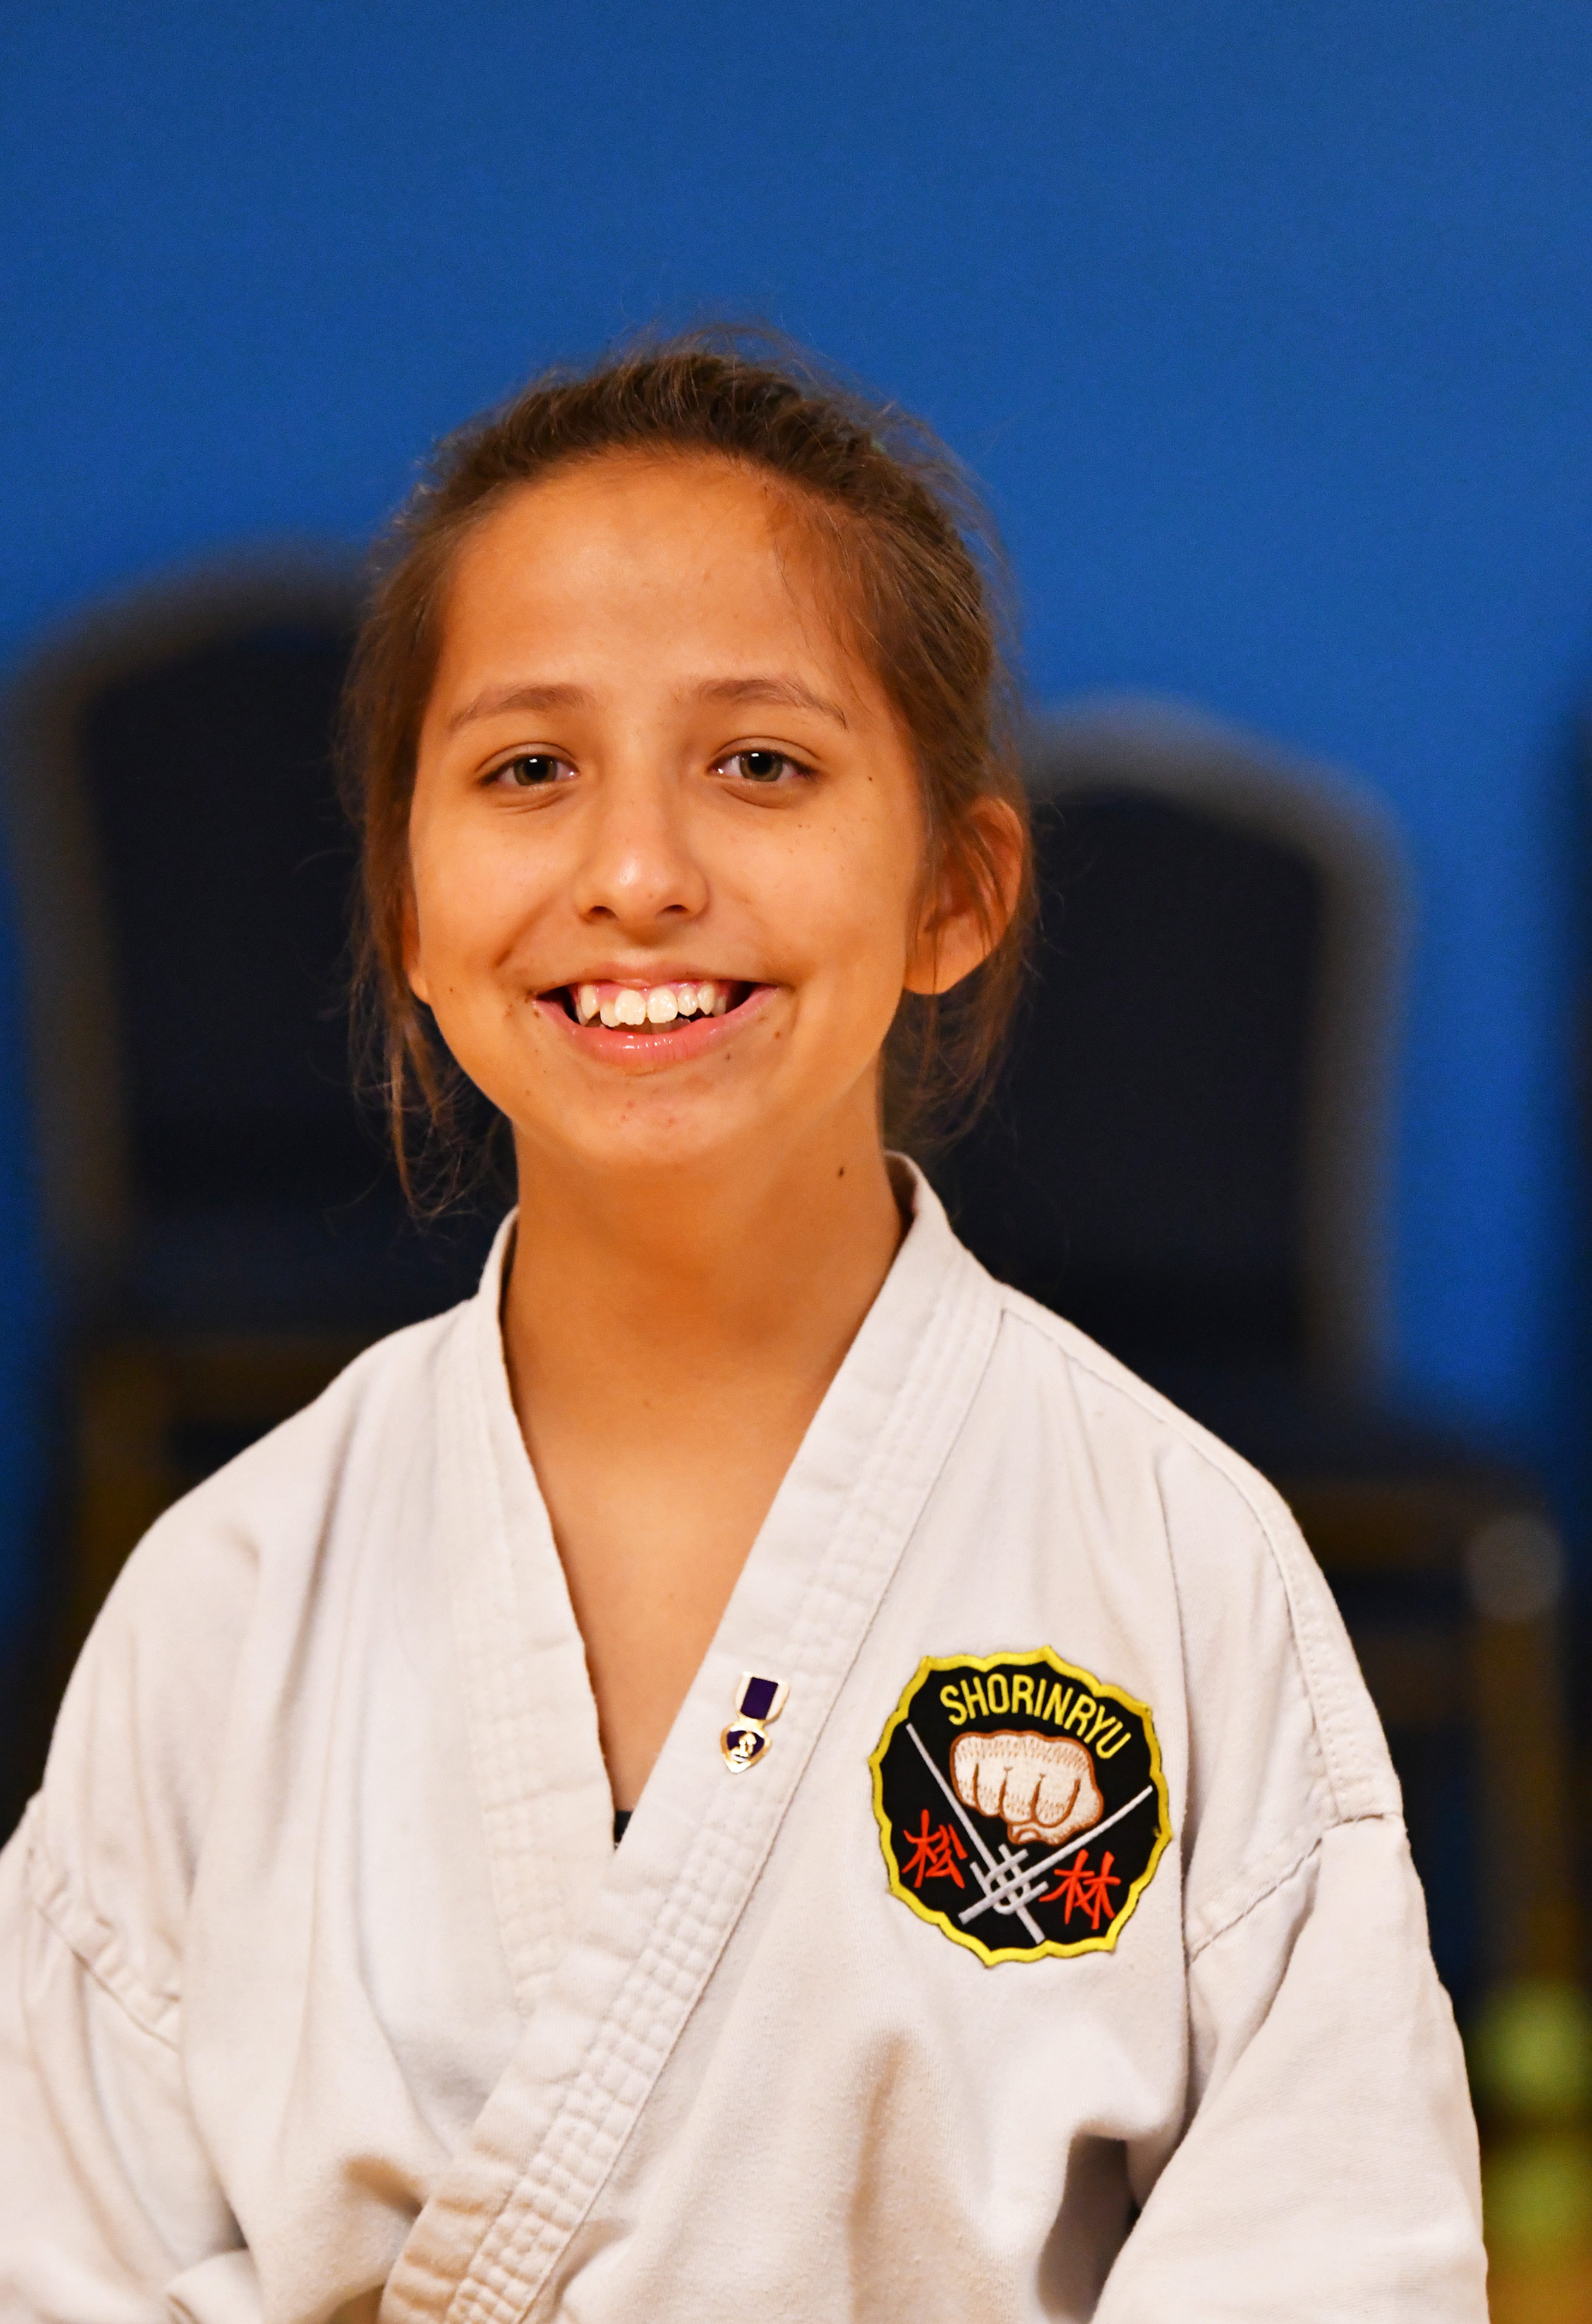 Brain surgery doesn’t stop this young Karate kid - Florida Today